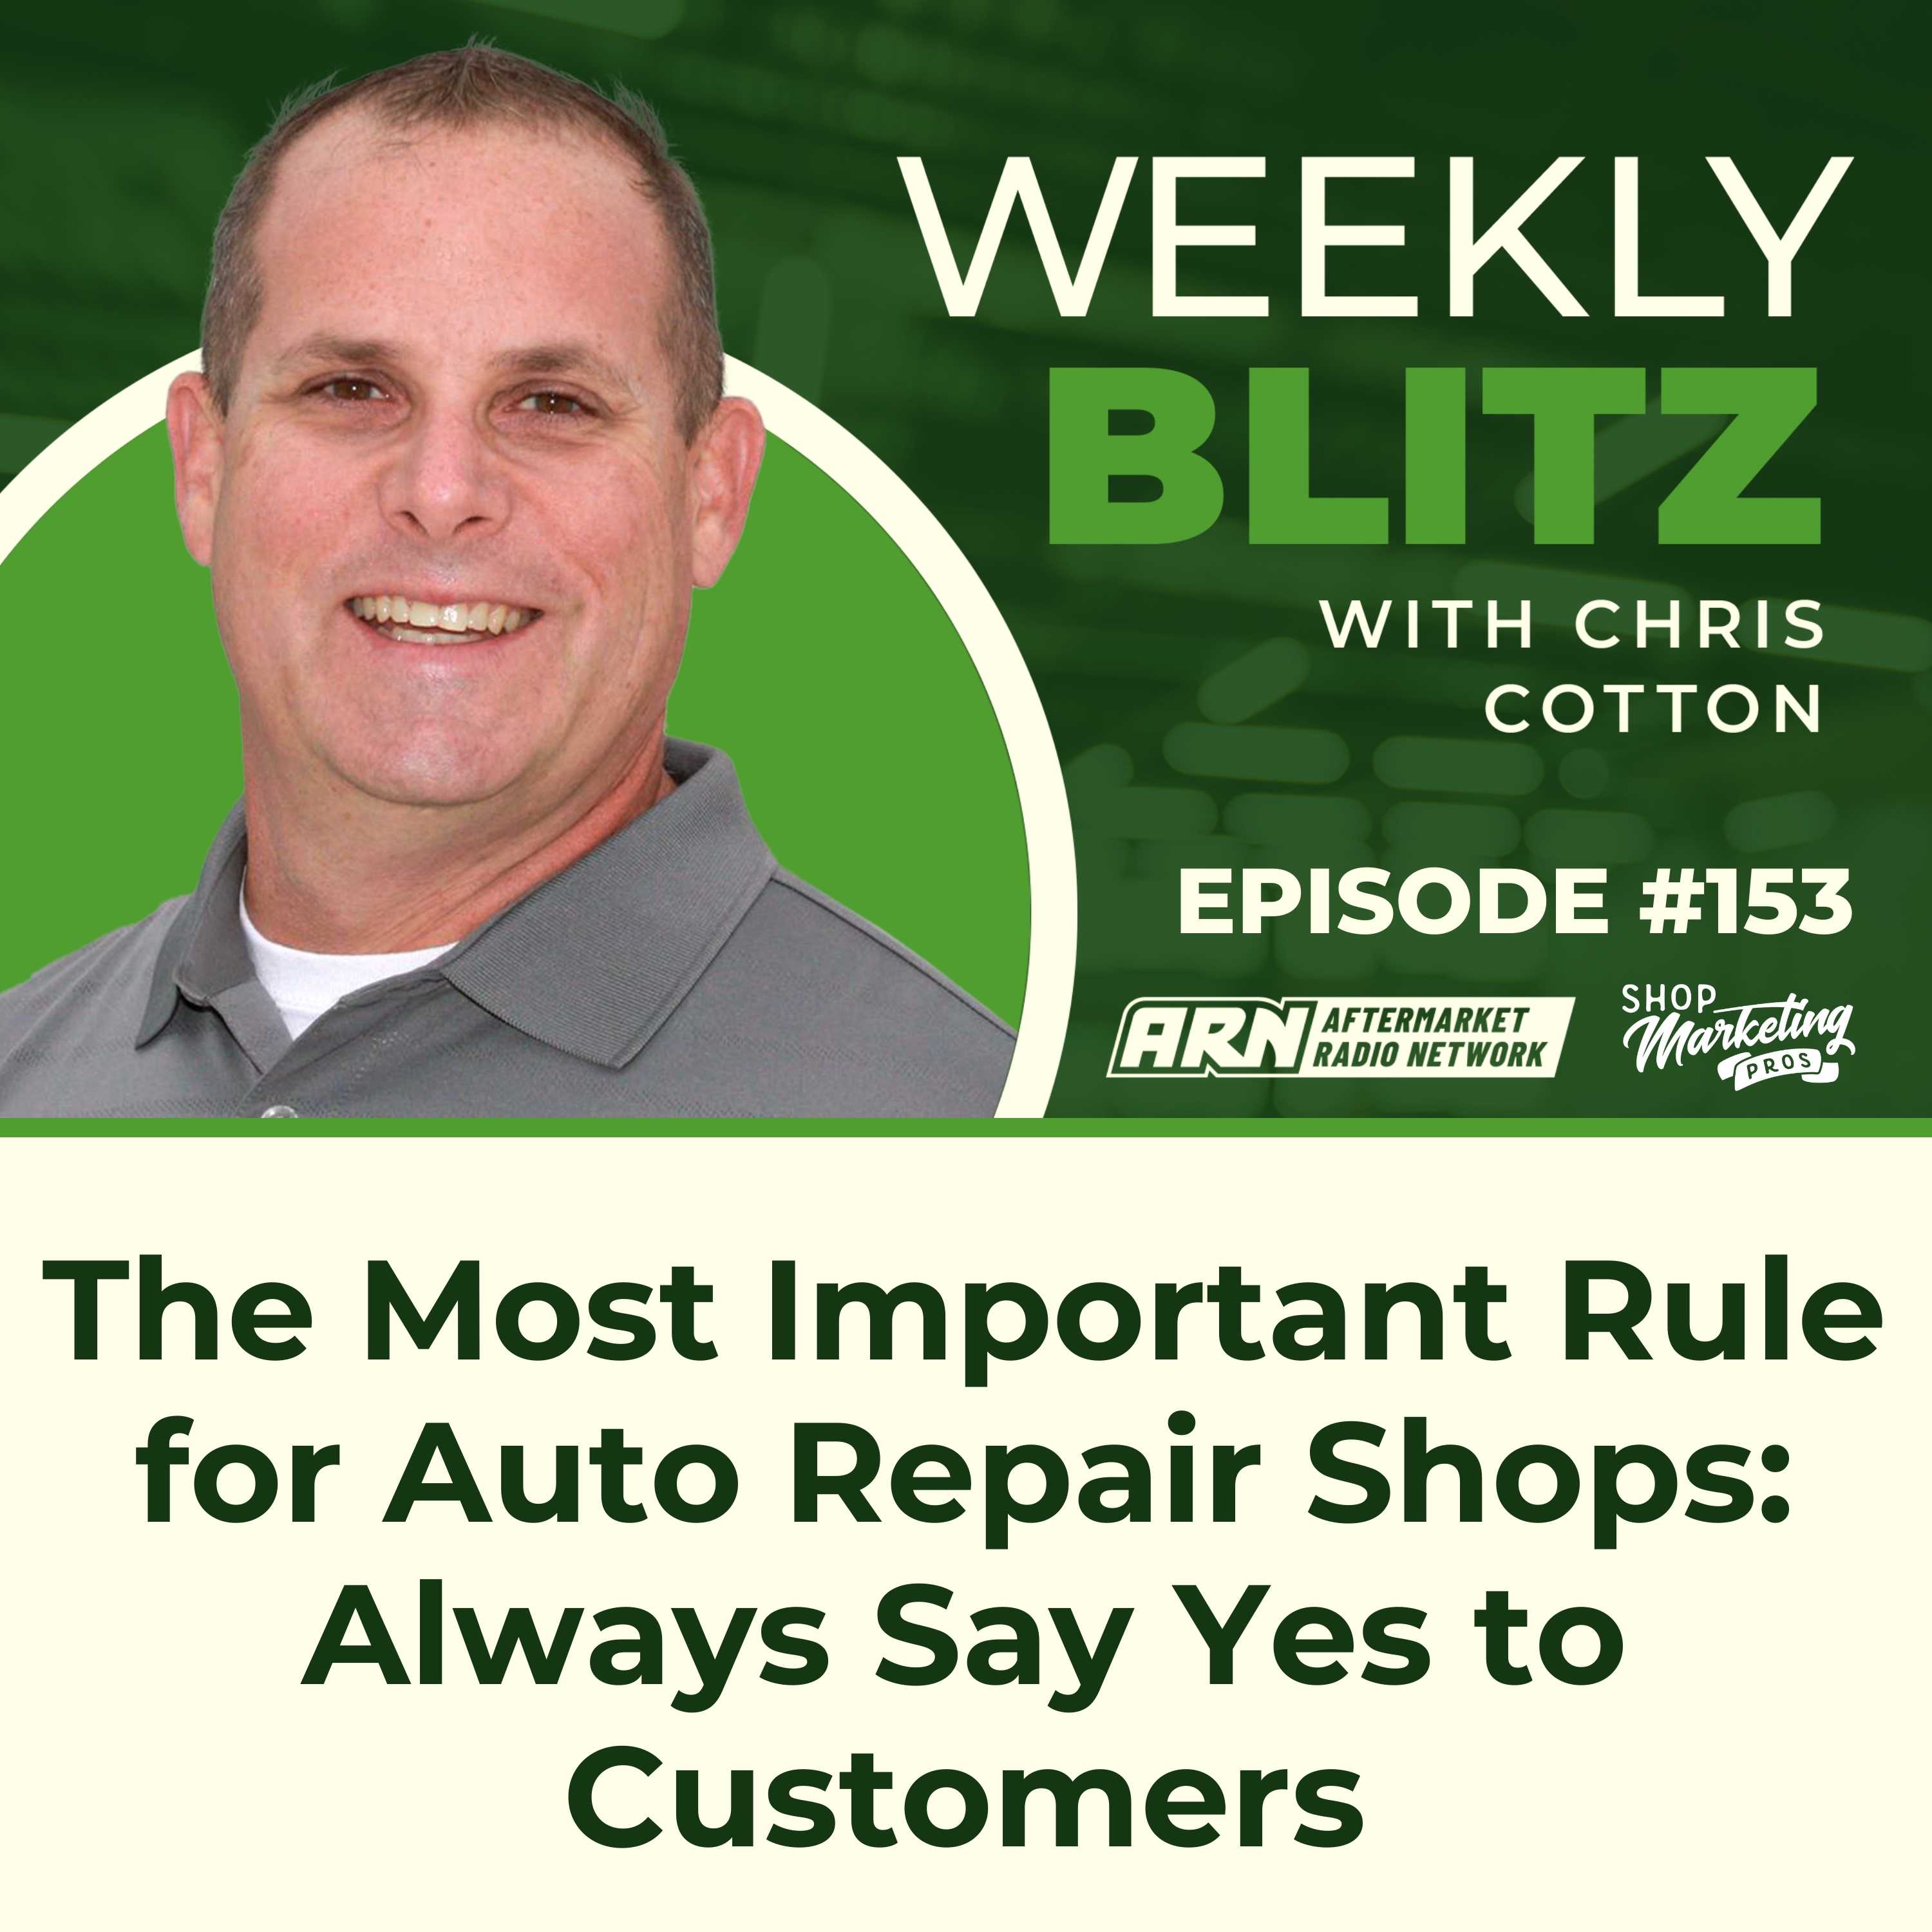 The Most Important Rule for Auto Repair Shops: Always Say Yes to Customers - Chris Cotton Weekly Blitz